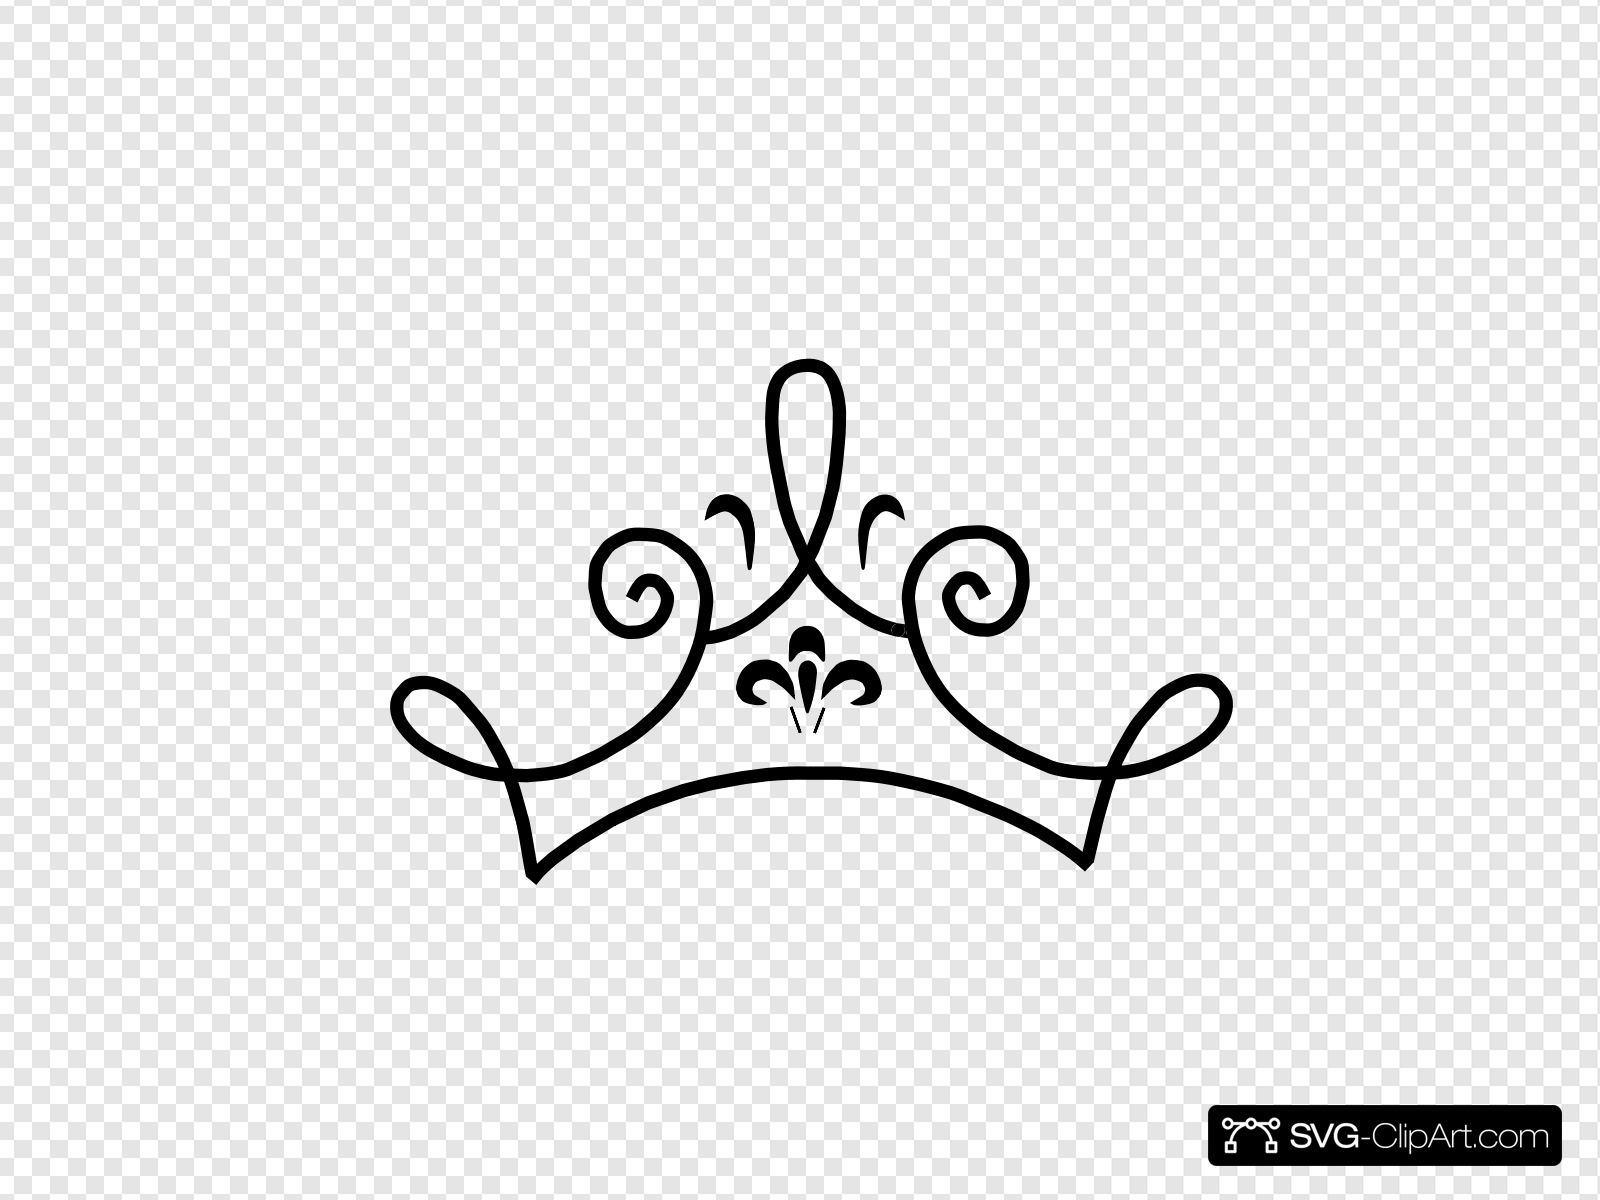 Princess Crown Clip art, Icon and SVG